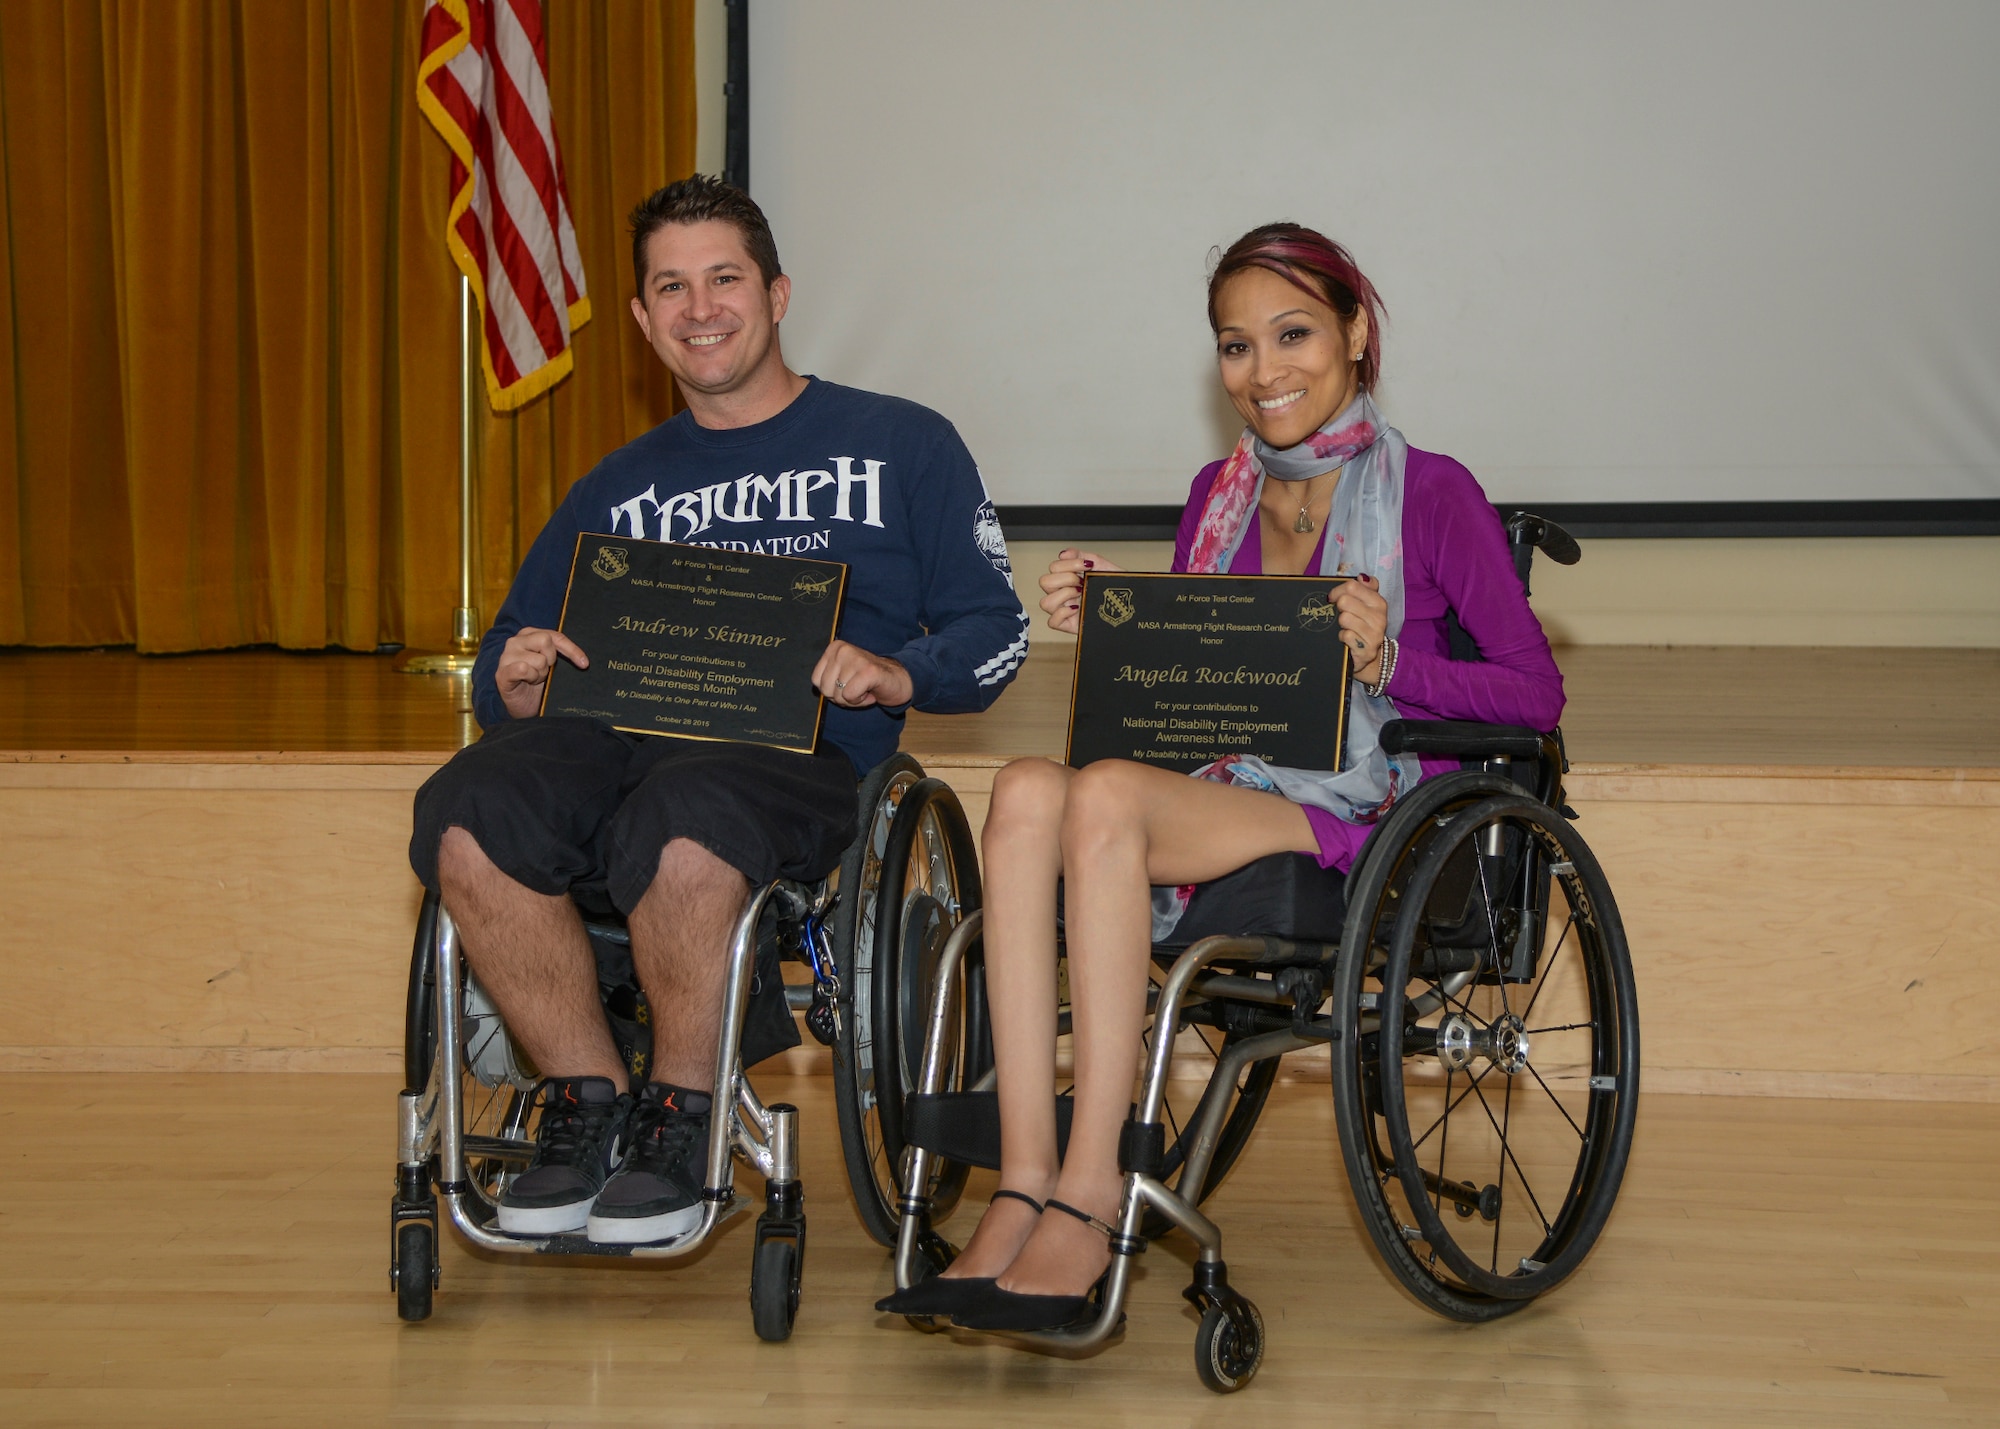 Andrew Skinner and Angela Rockwood were honored for being the guest speakers at this year's 412th Test Wing National Disability Employment Awareness Month luncheon Oct. 28. Both are survivors of accidents that left them quadriplegic. In spite of their injuries, both Rockwood and Skinner found strength in their situations. (U.S. Air Force photo by Rebecca Amber)

